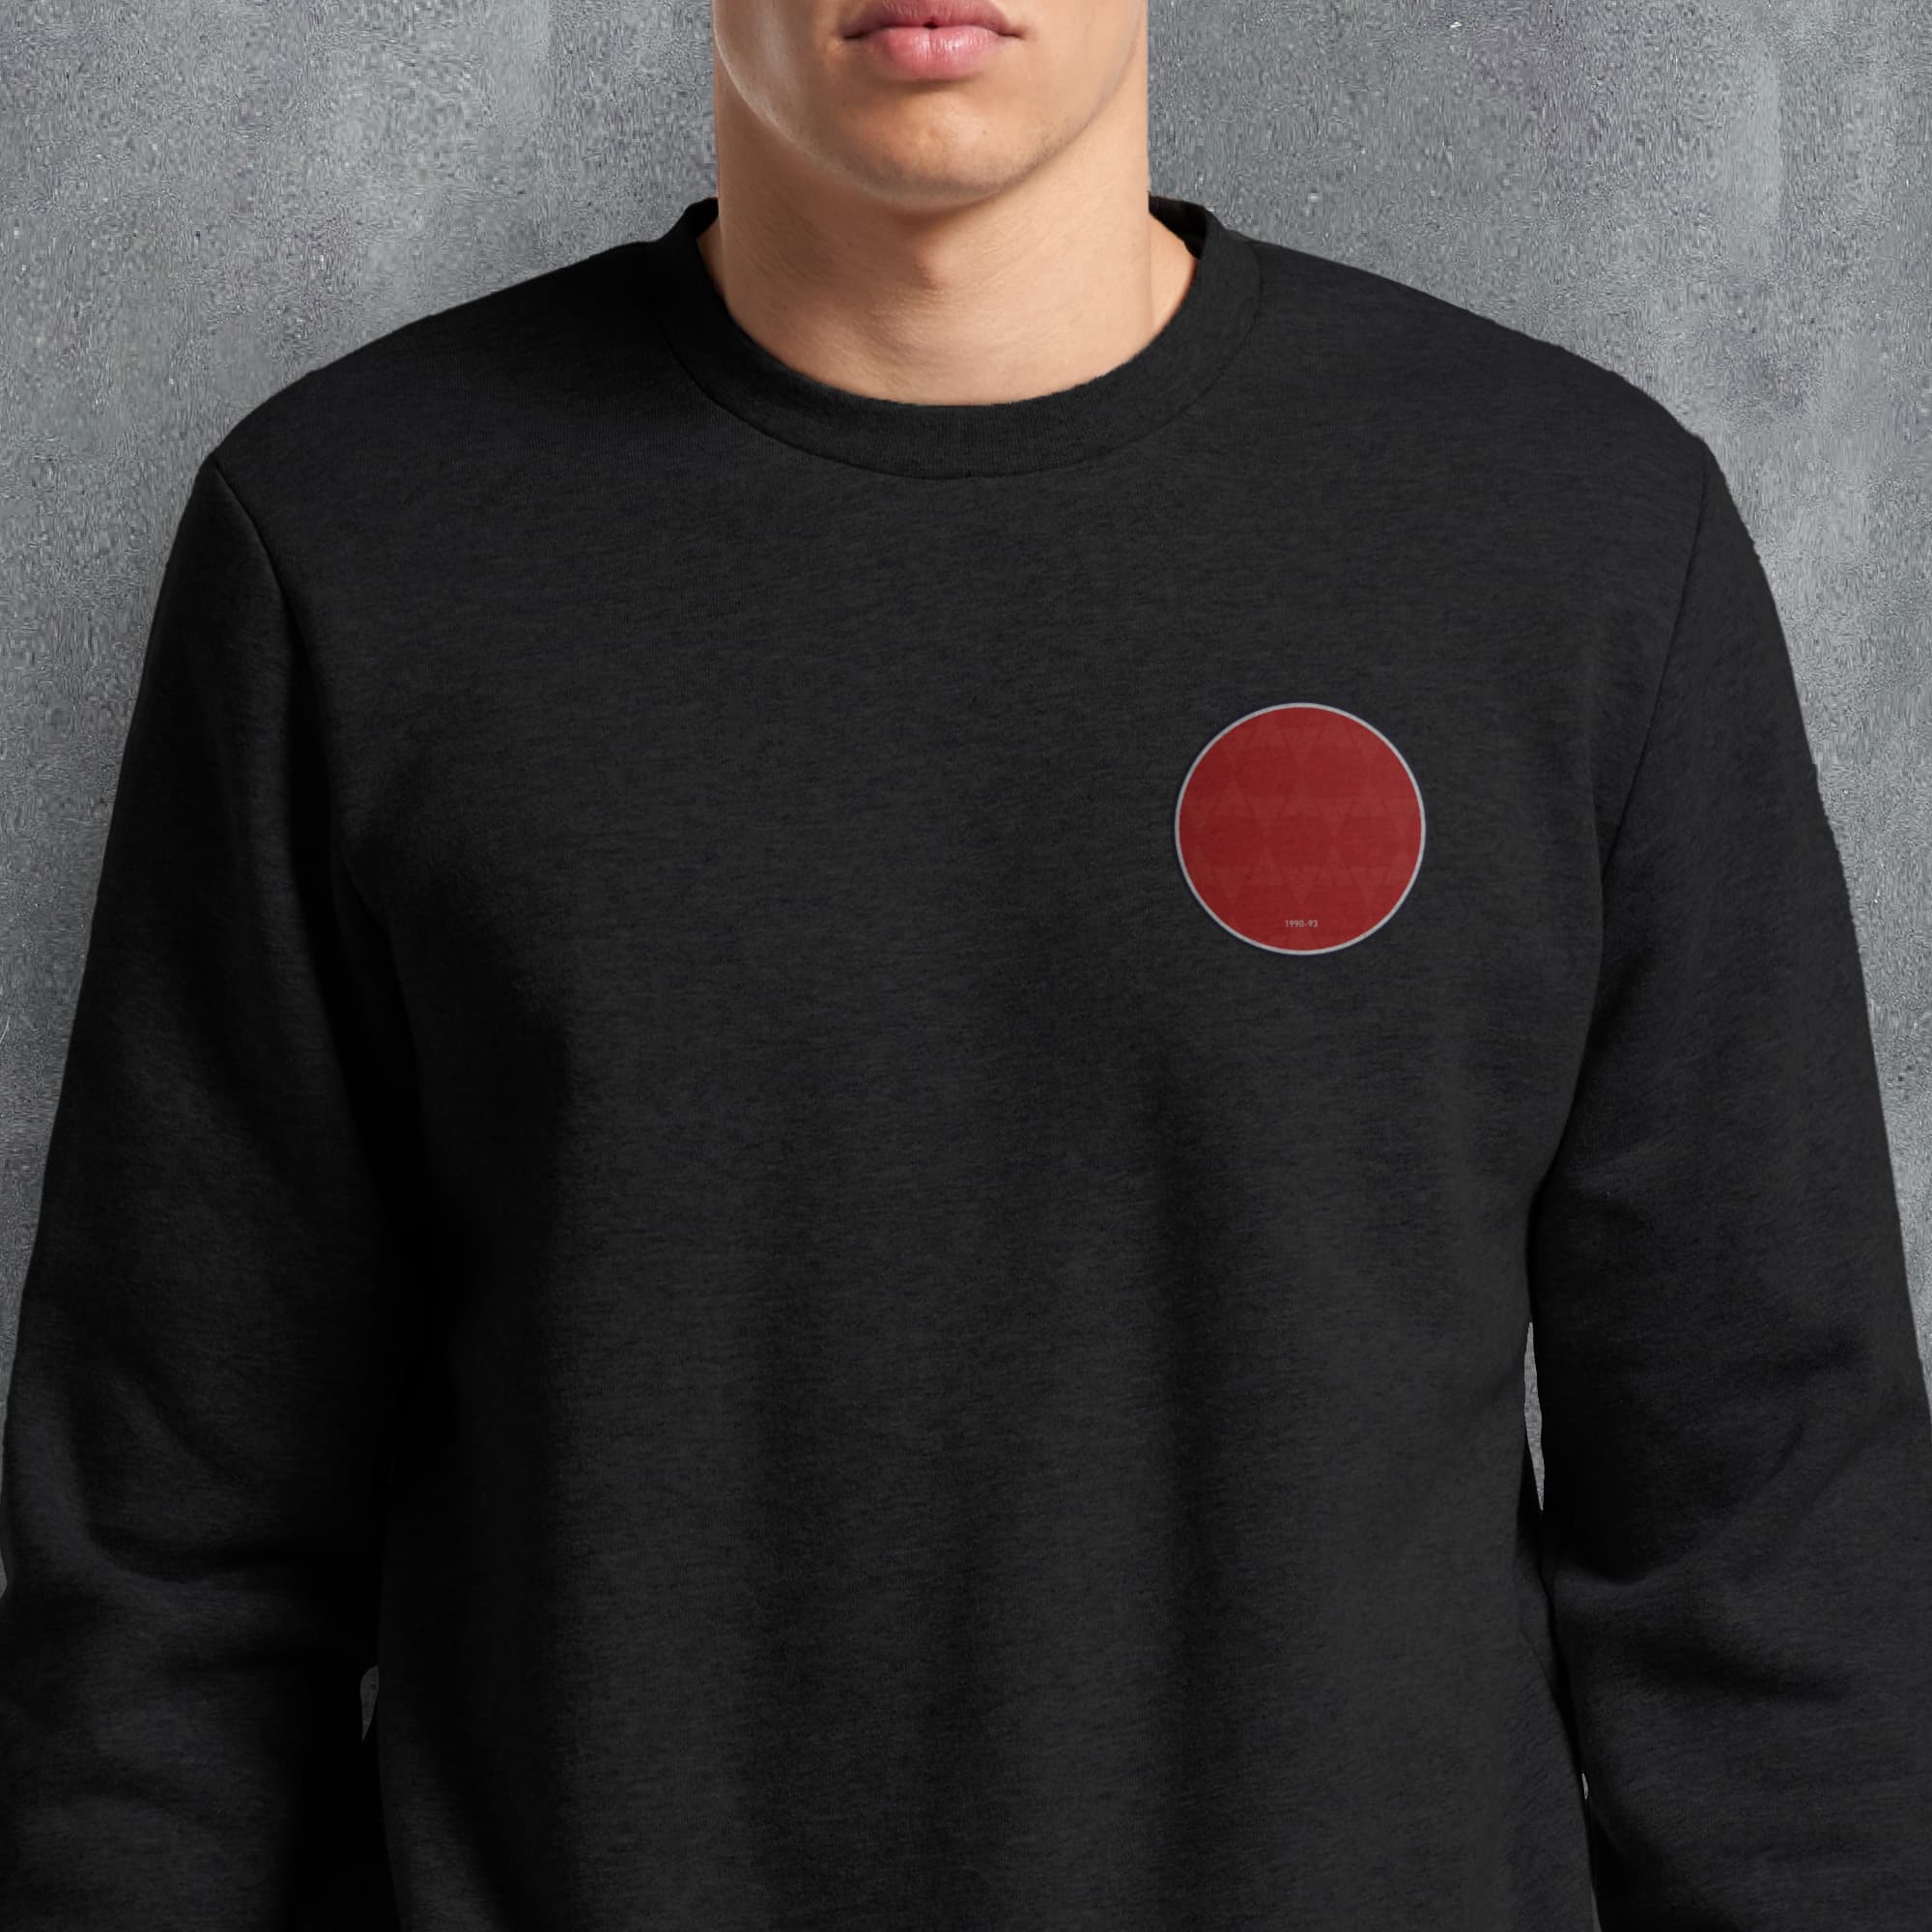 a man wearing a black sweatshirt with a red circle on it